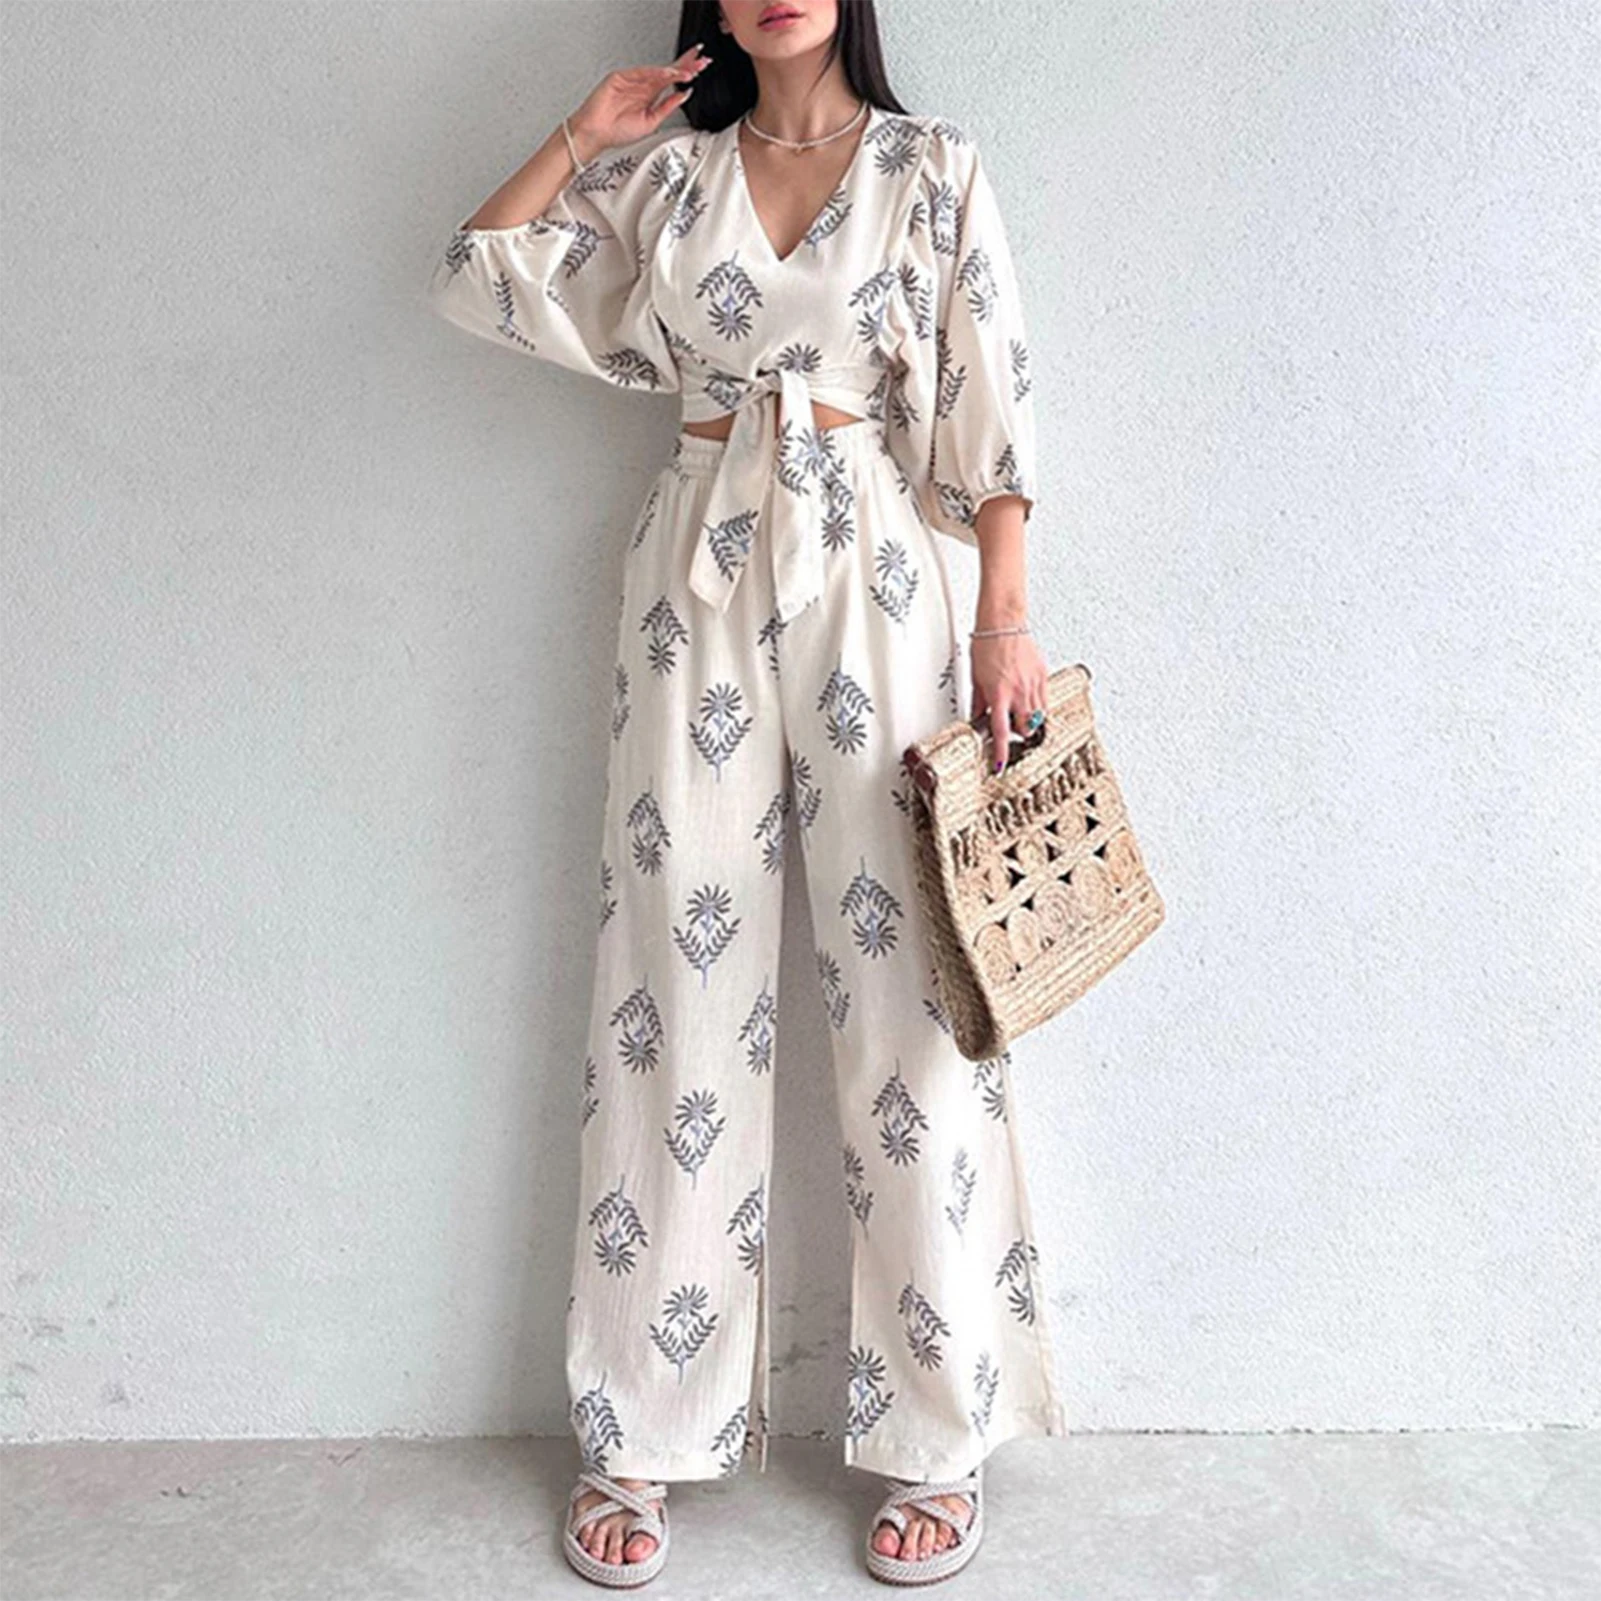 

Puff Sleeve Summer 2 Pieces Set V Neck Women Printed Shirt Top Pants Navel Exposed Elastic Waisted Loose Fit Vacation Outfit